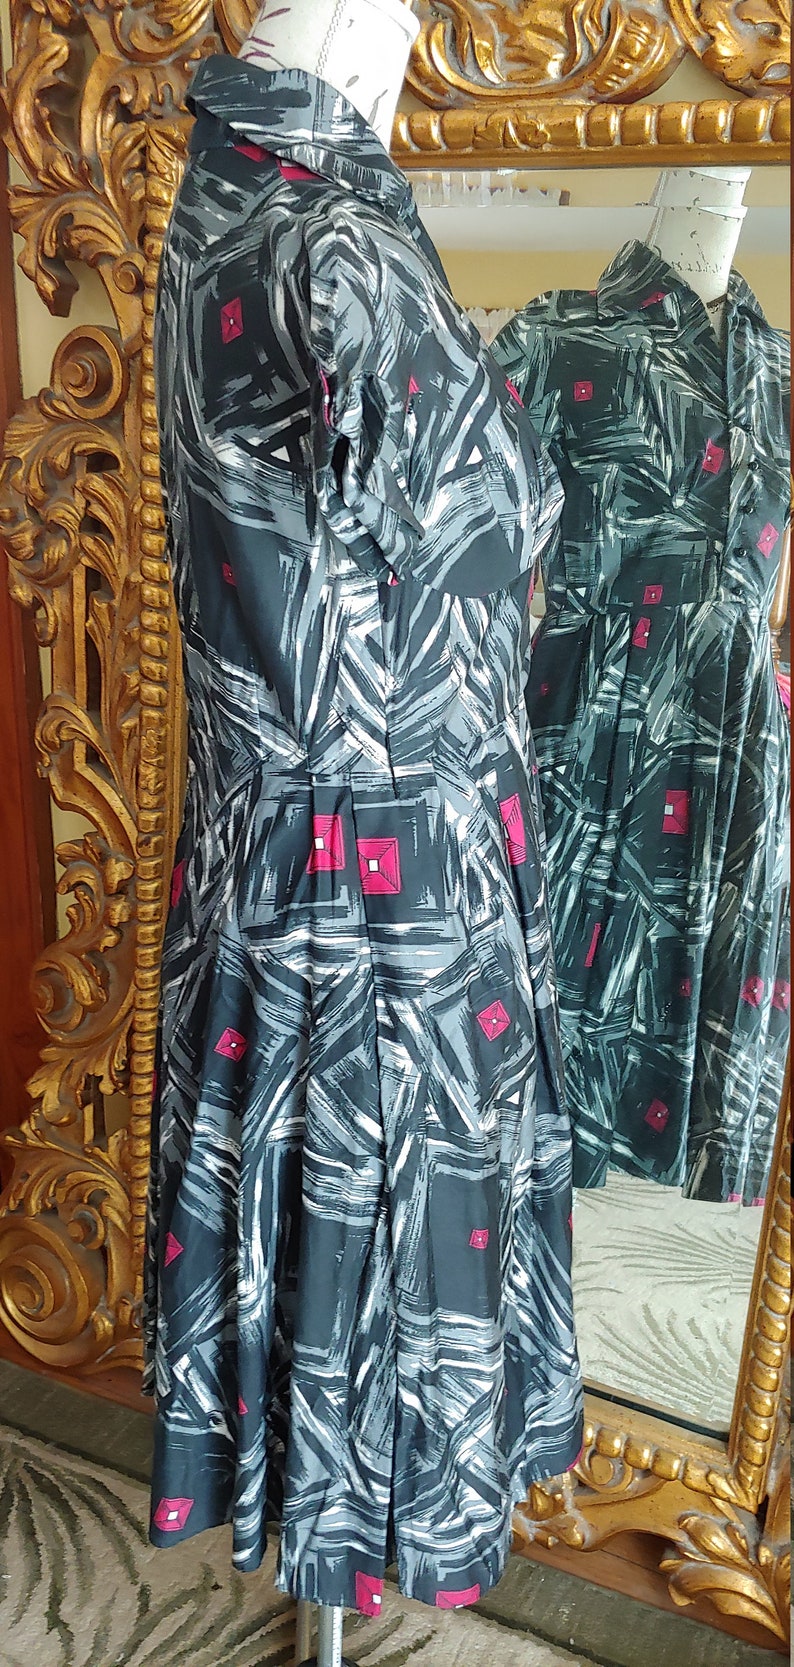 Vintage 1940's Black and Gray Abstract Print Cotton Dress image 3